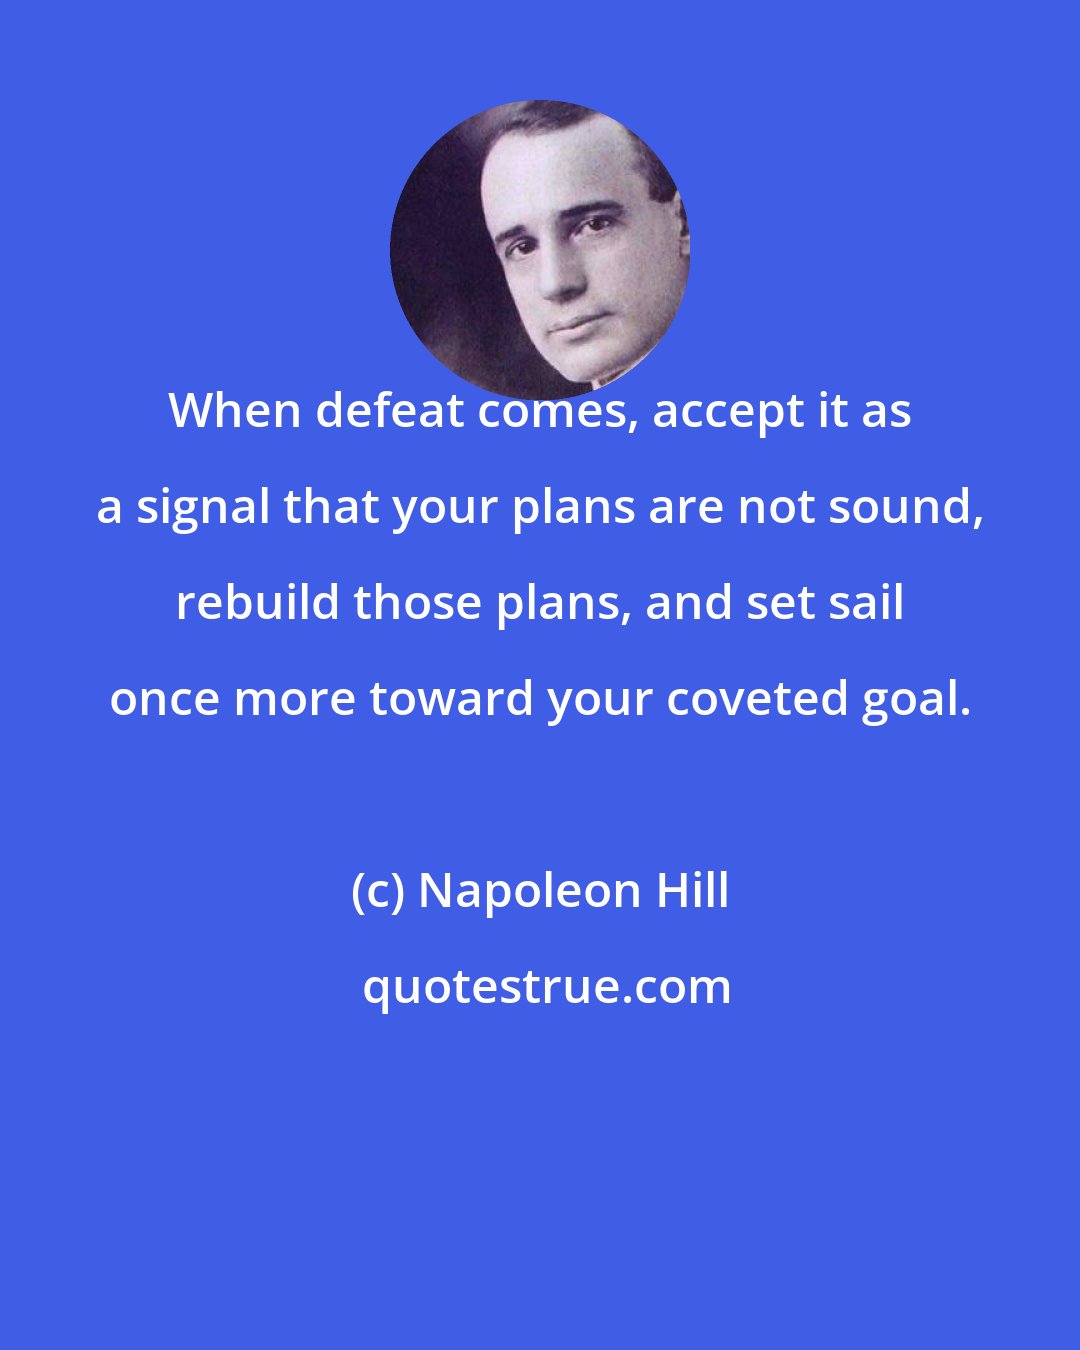 Napoleon Hill: When defeat comes, accept it as a signal that your plans are not sound, rebuild those plans, and set sail once more toward your coveted goal.